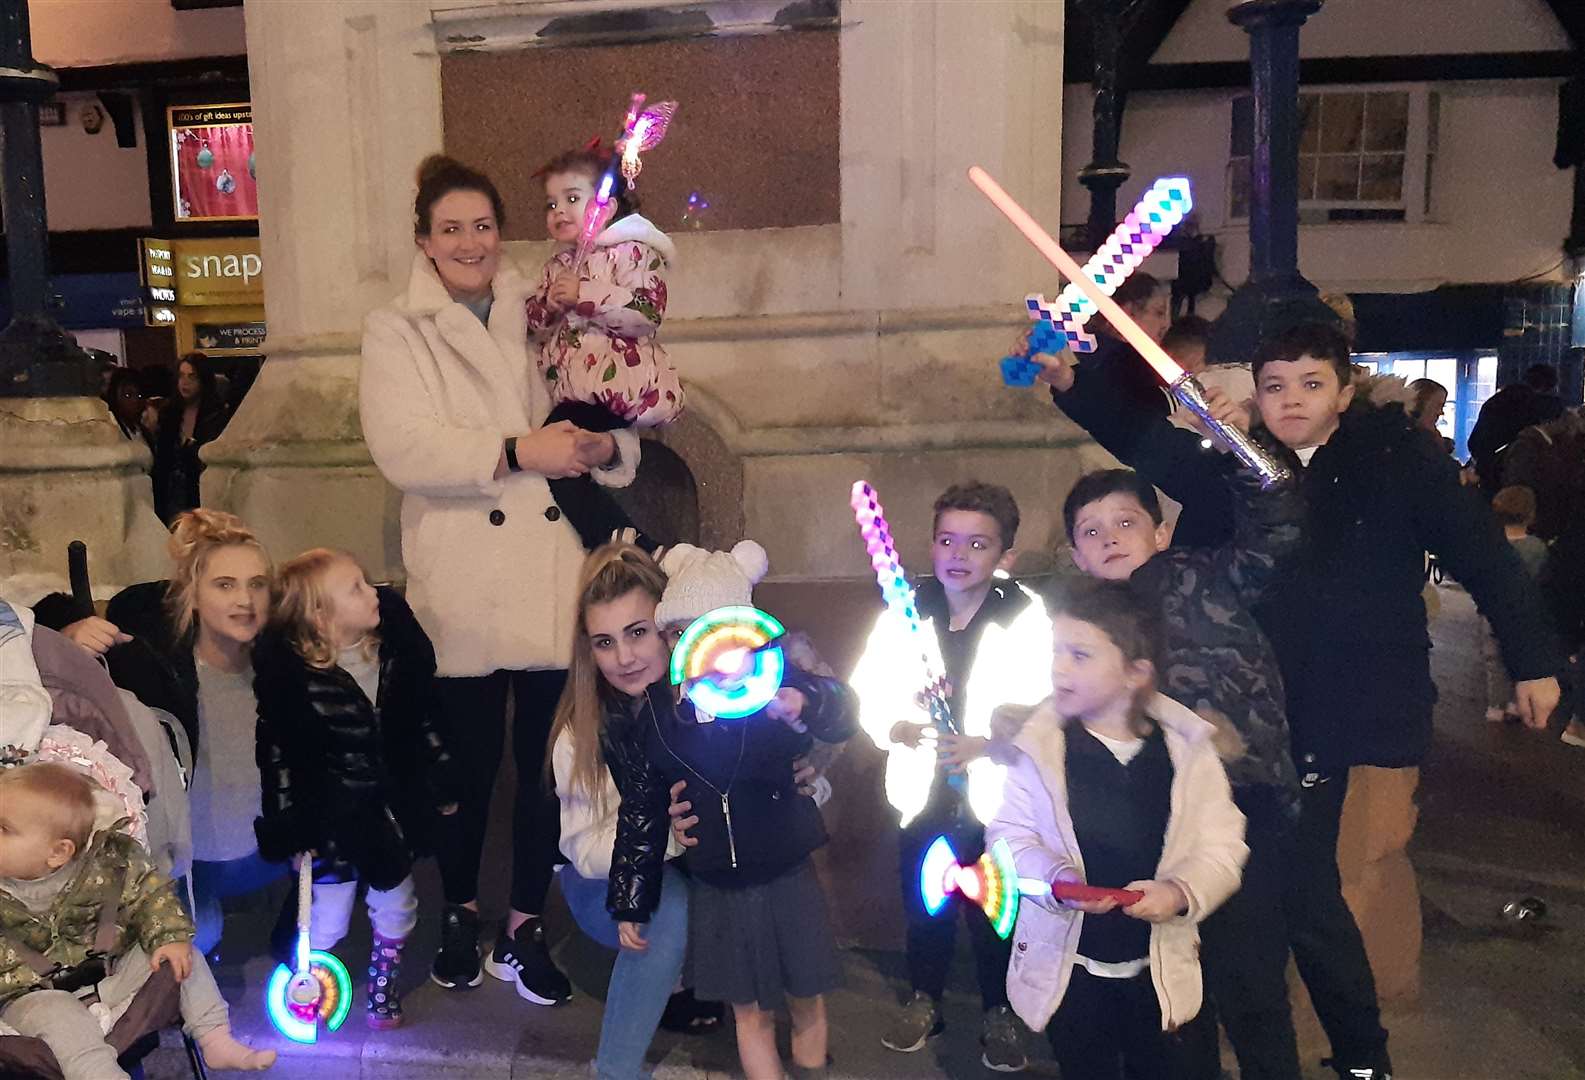 Mum Danielle Denton, Marie Stephenson and Kayley Swift, with their children at the Maidstone Christmas lights switch on